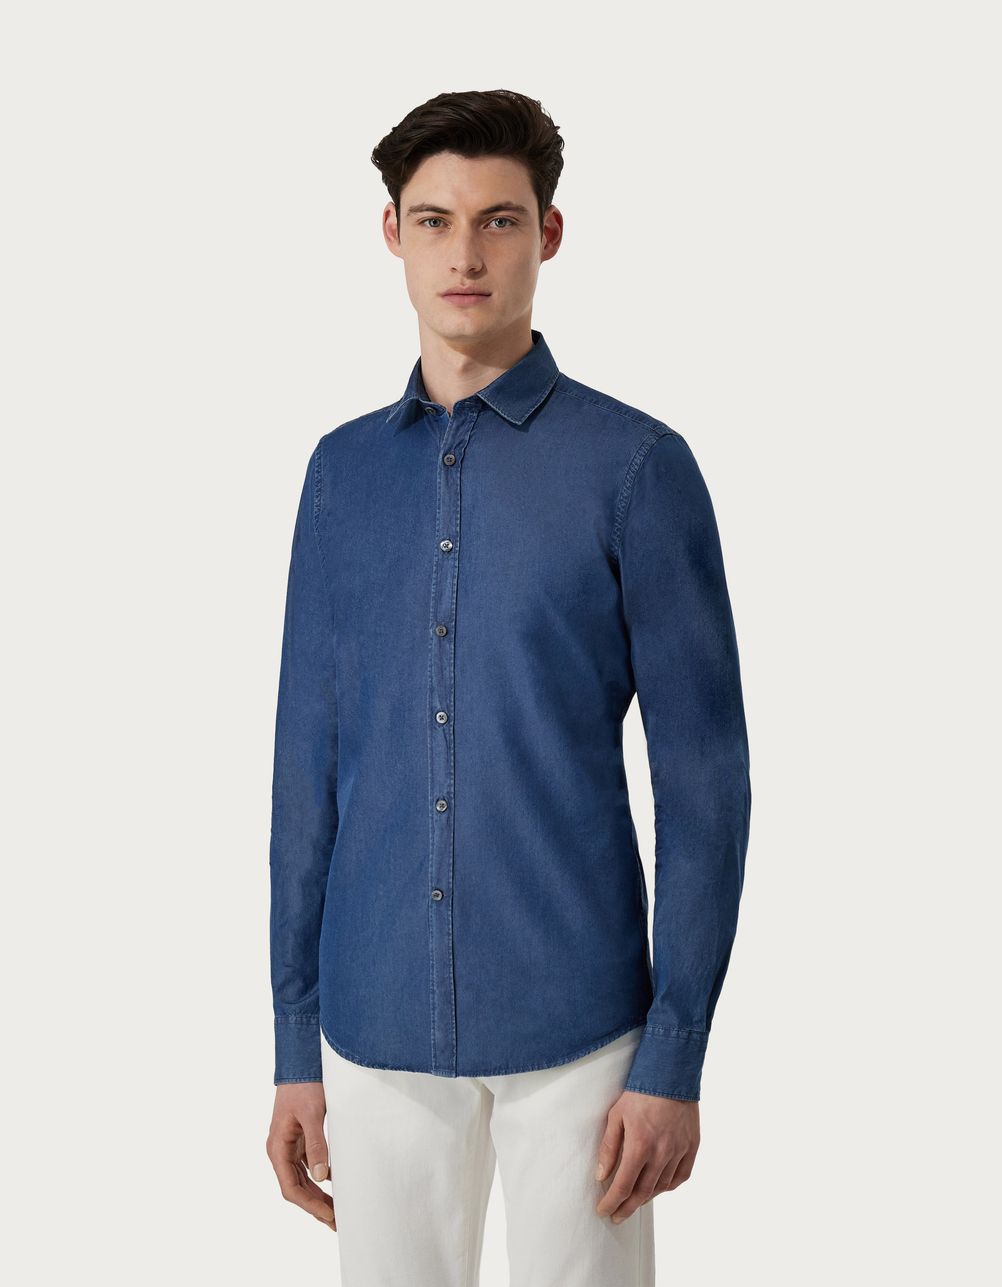 Light blue cotton and lyocell slim-fit shirt